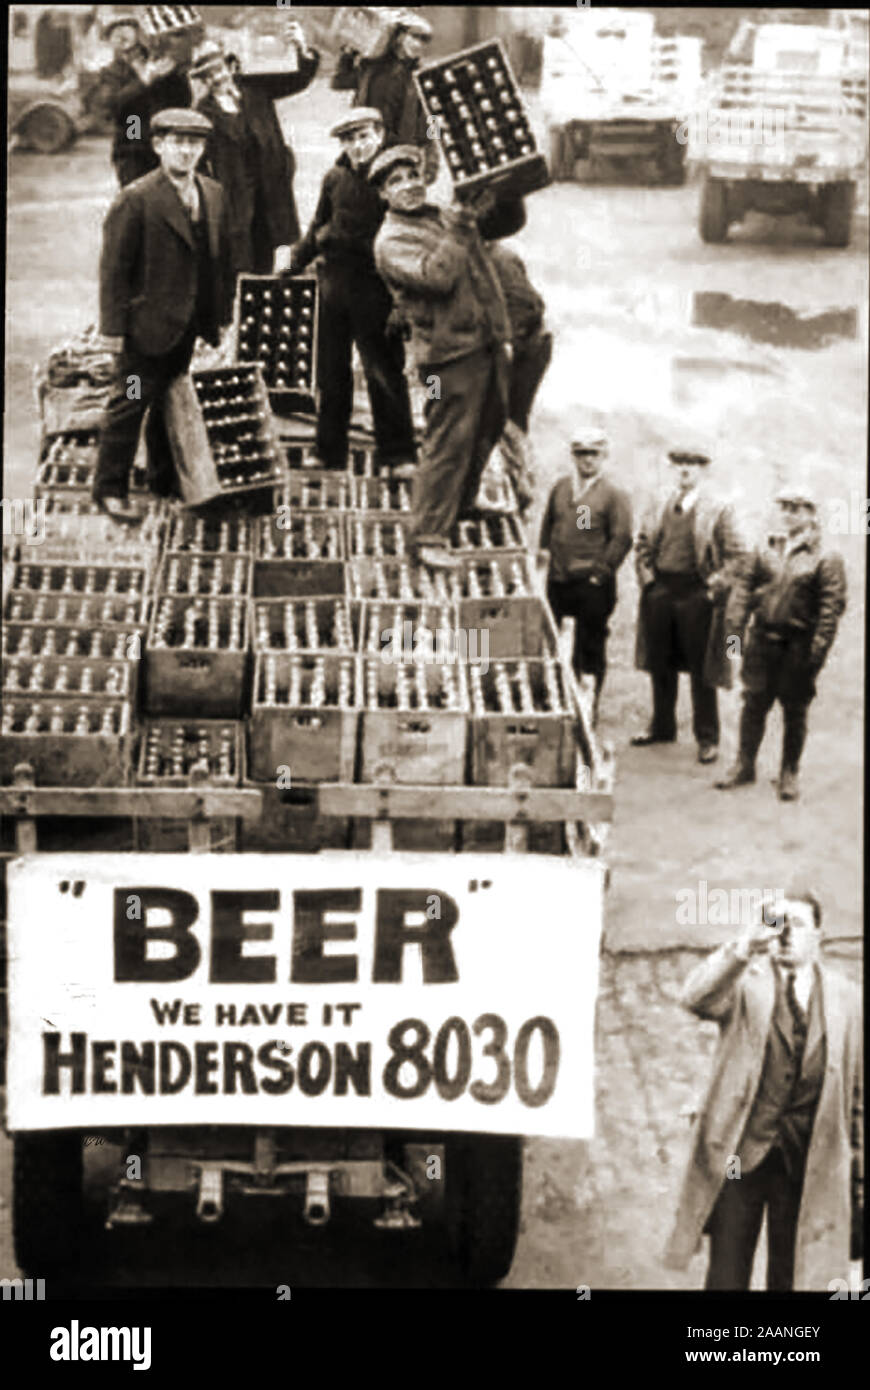 PROHIBITION / TEETOTALISM /  MOONSHINE / ABSTINENCE - The end of prohibition in America 2933  - On the wagon are large stocks of Henderson's Beer ( In some states, prohibition was already in force by Prohibition became a legal  nationwide ban on the sale and import of alcoholic beverages that lasted from 1920 to 1933.) Stock Photo